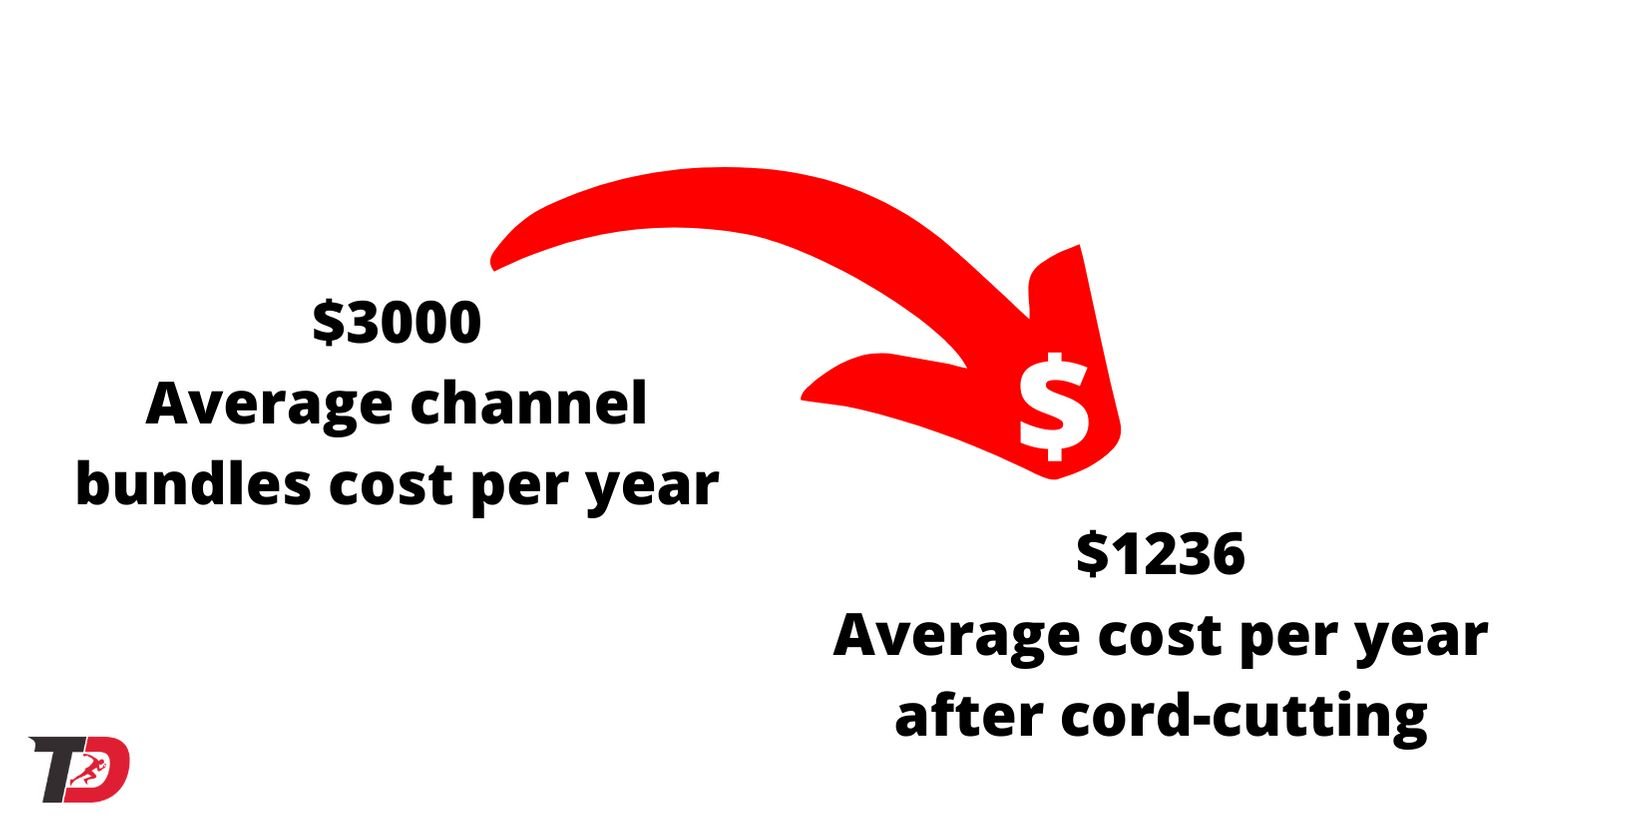 Cost of streaming service bundle versus cable